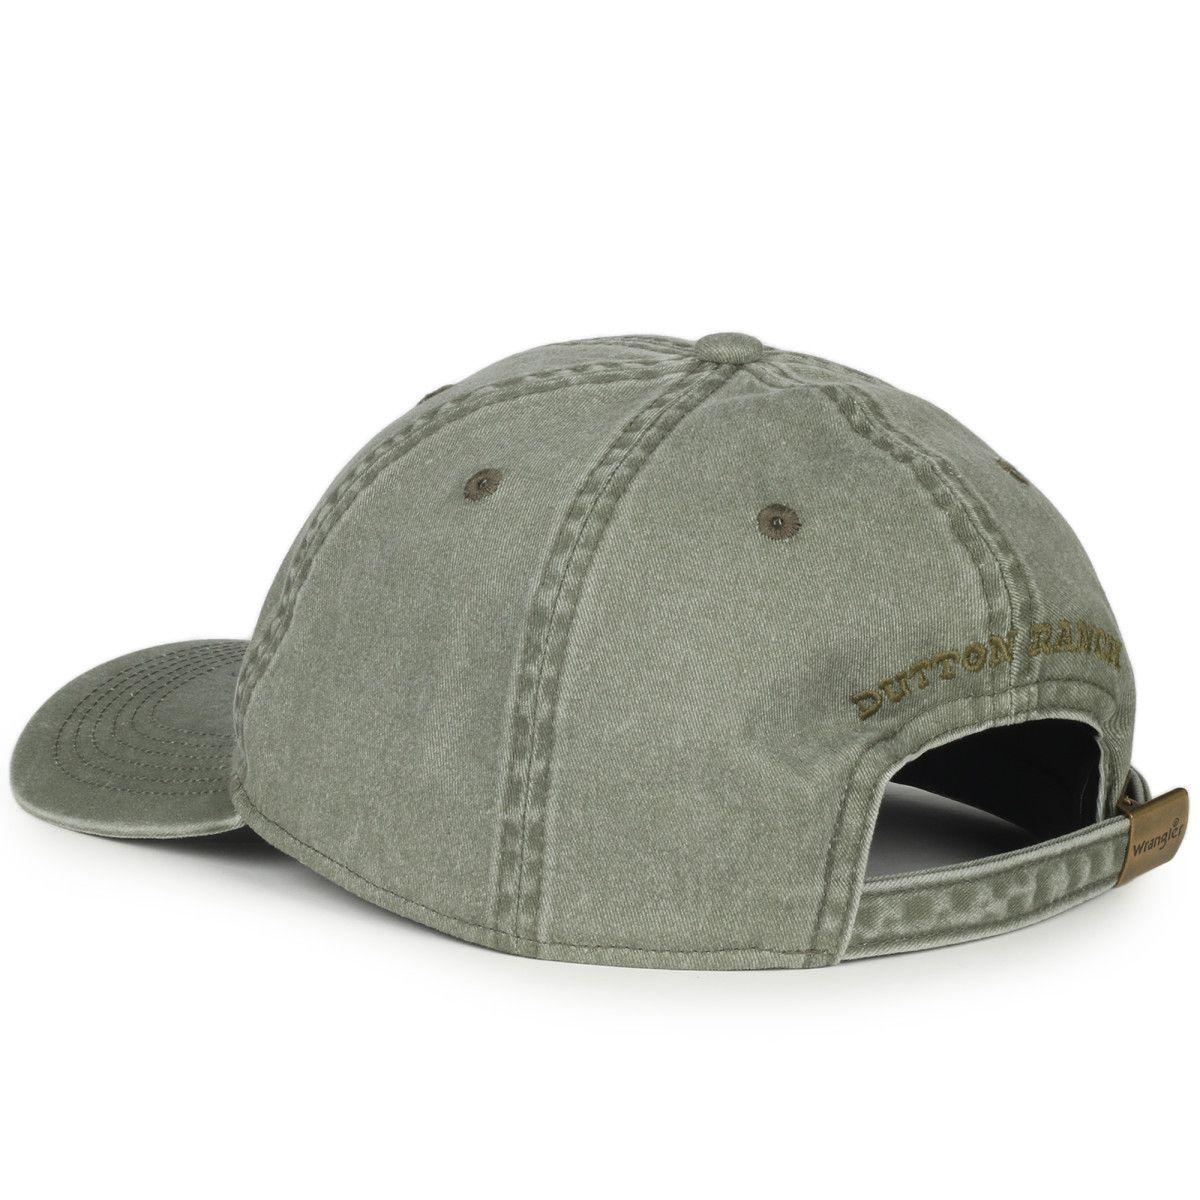 Wrangler X Yellowstone Stitched Cap - Leapfrog Outdoor Sports and Apparel